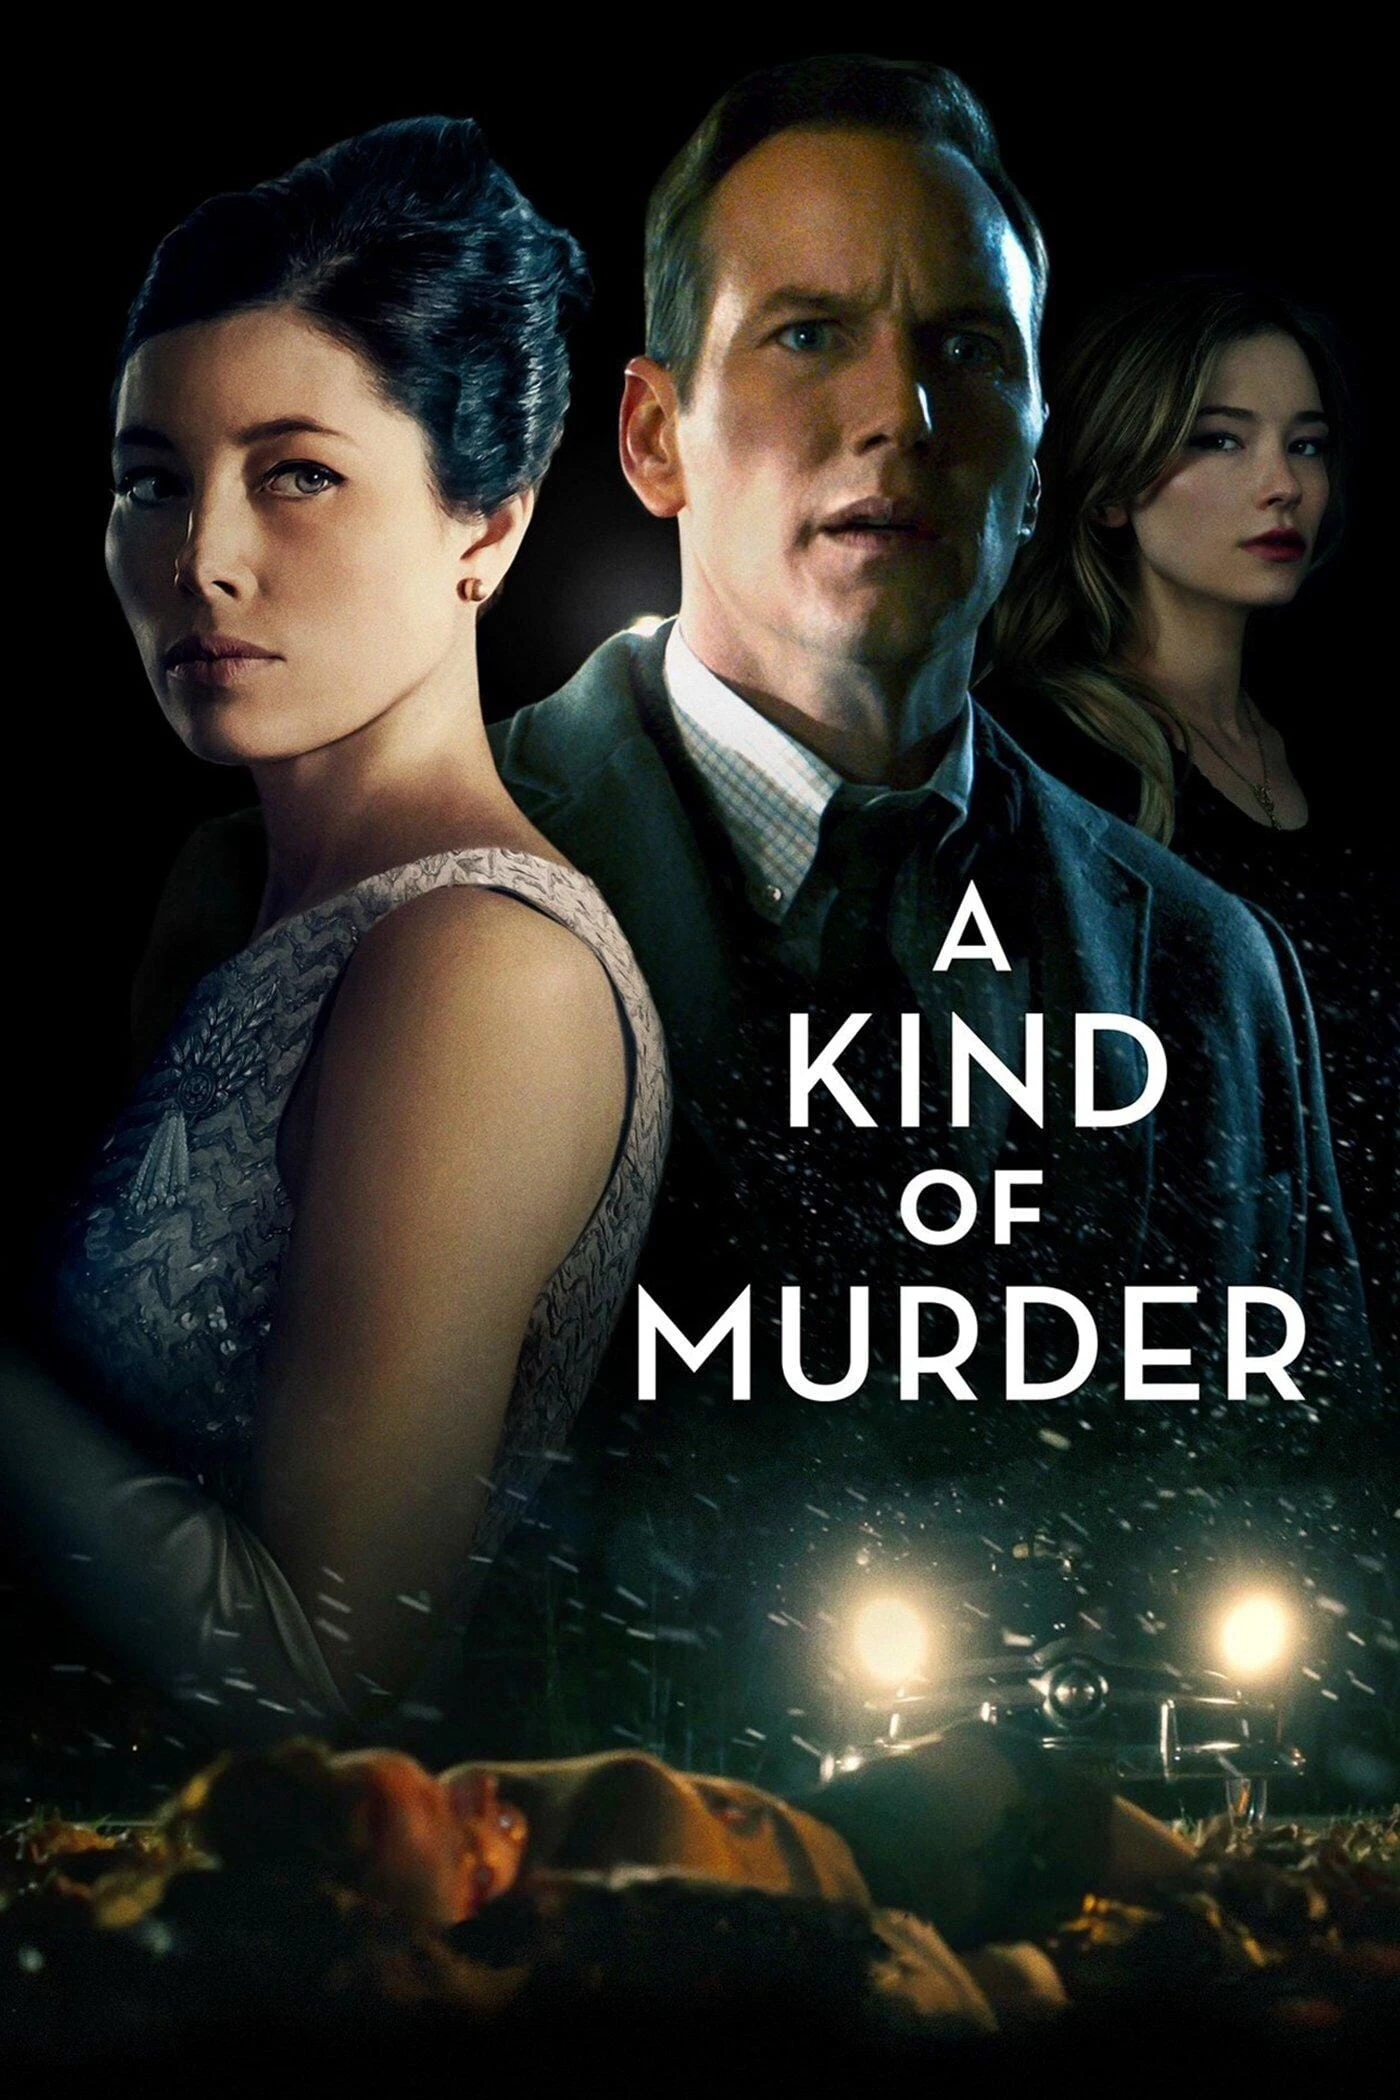 A Kind of Murder | A Kind of Murder (2016)